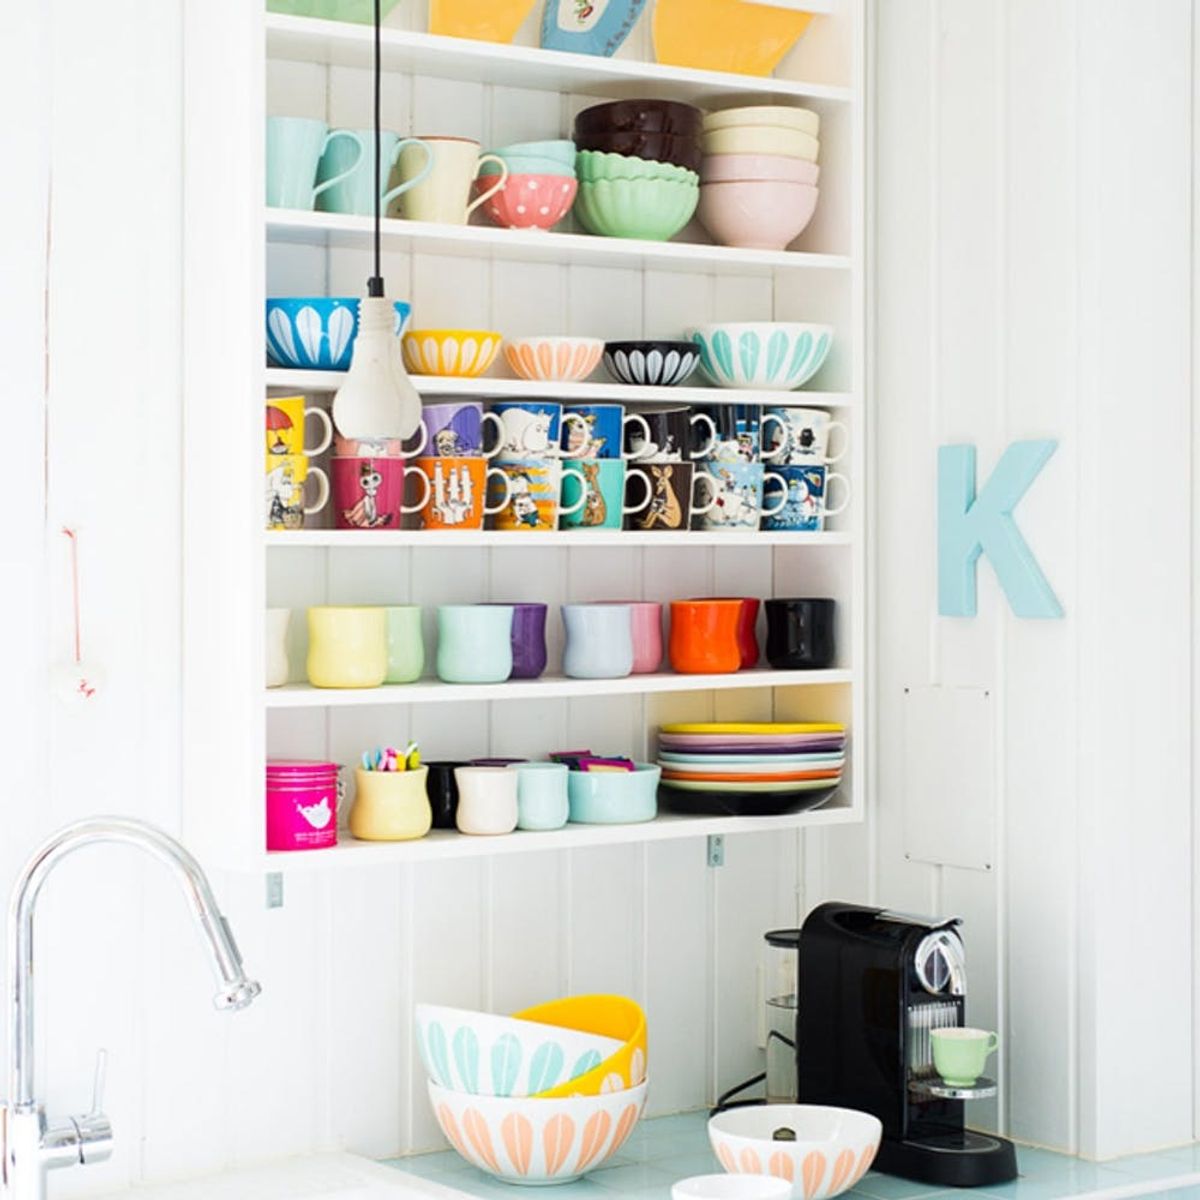 12 Colorful Ways to Make Your Small Space Look Way Bigger